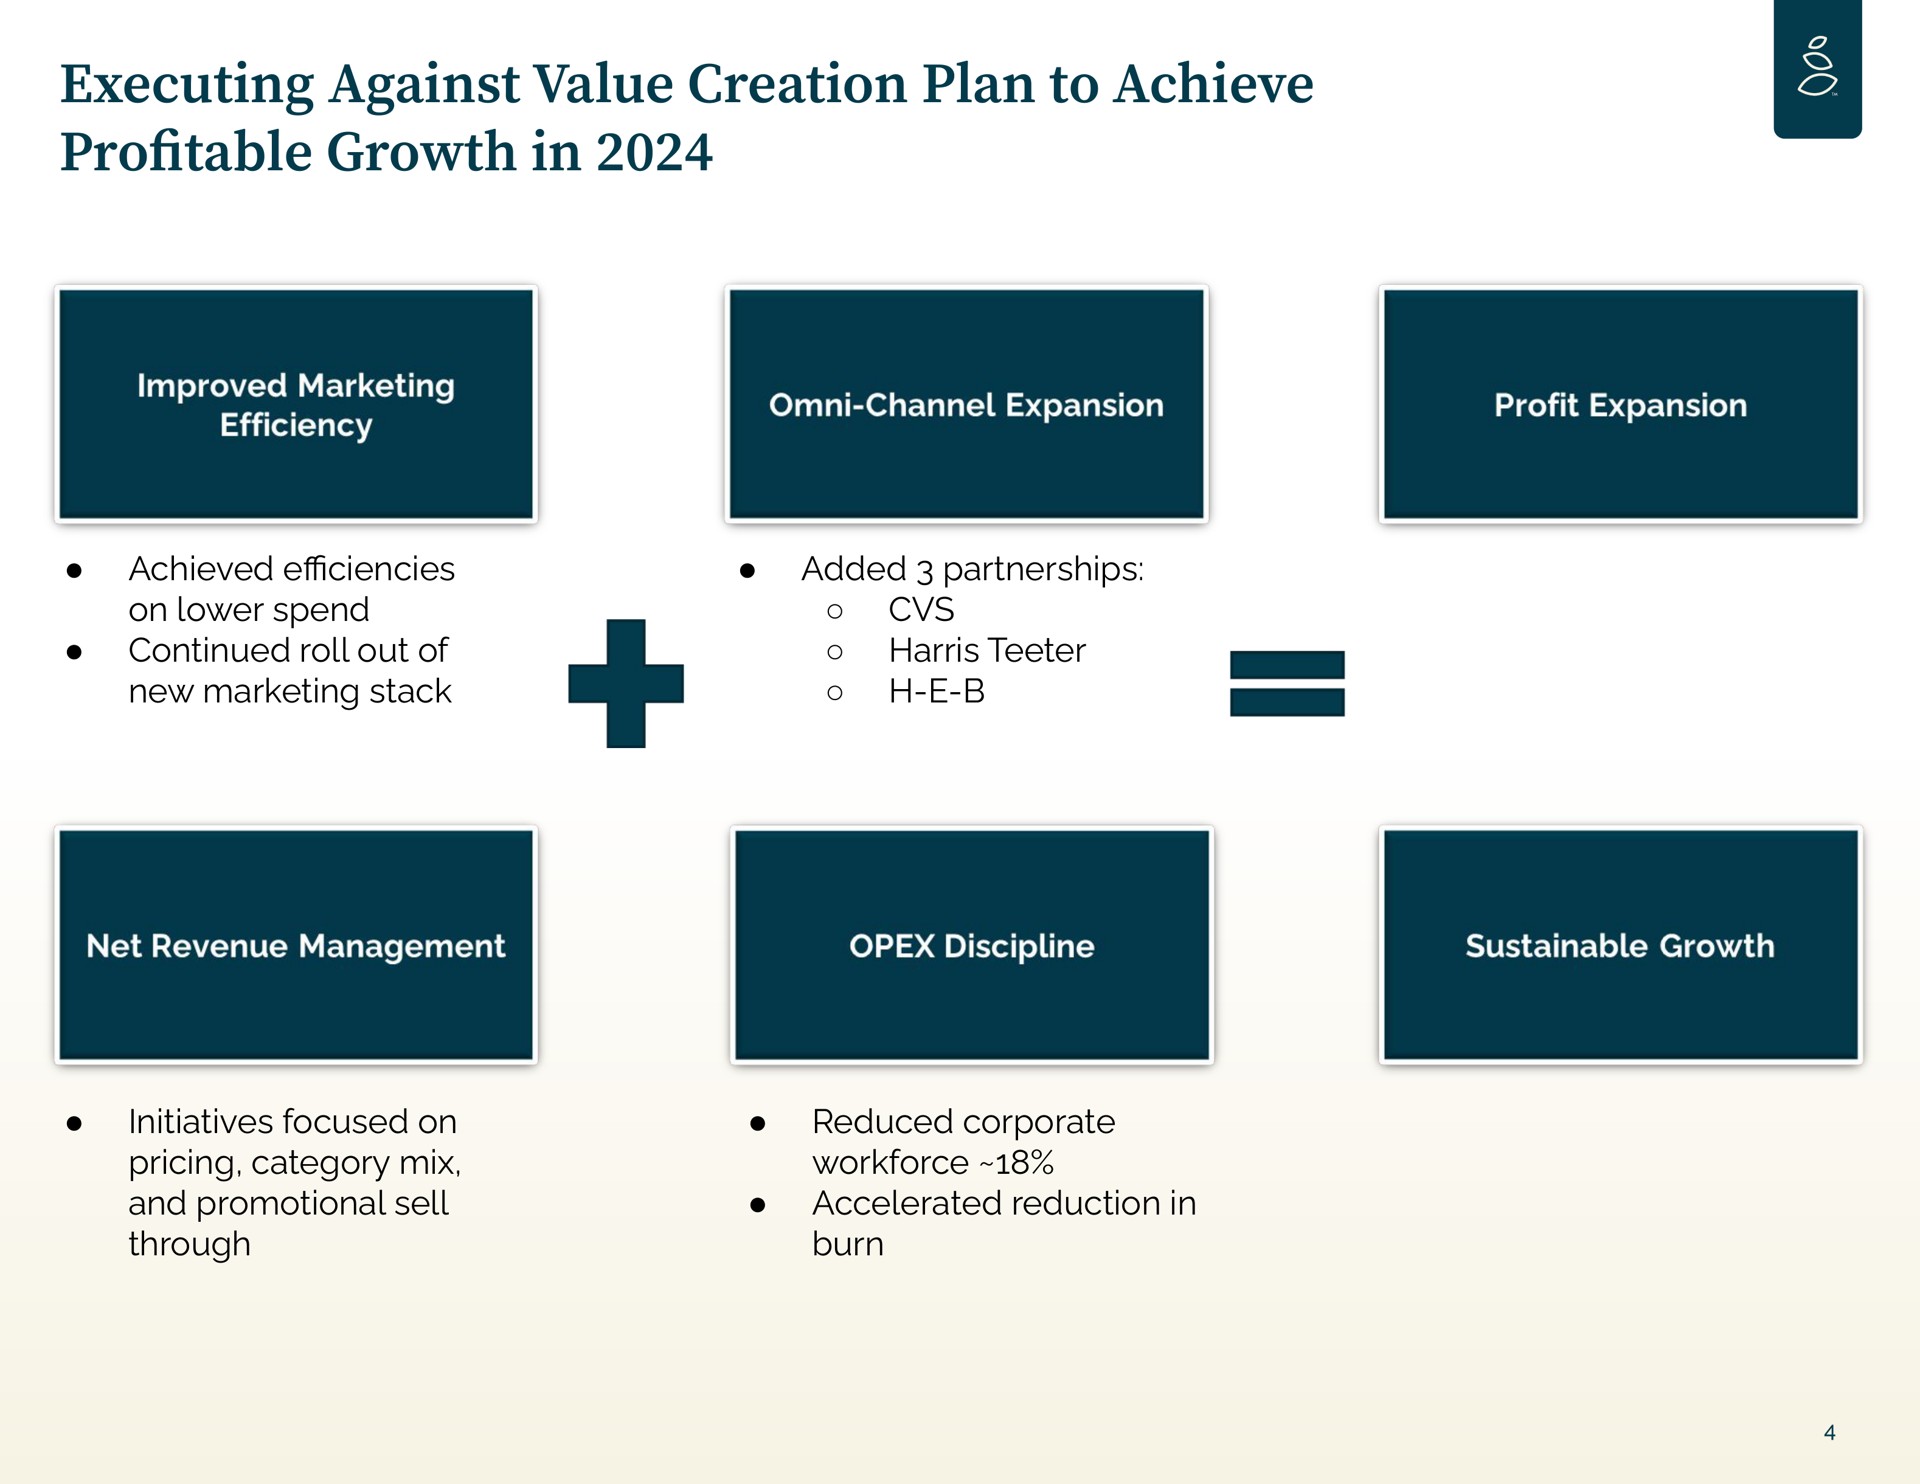 executing against value creation plan to achieve pro table growth in achieved on lower spend continued roll out of new marketing stack added partnerships teeter initiatives focused on pricing category mix and promotional sell through reduced corporate accelerated reduction in burn profitable | Grove